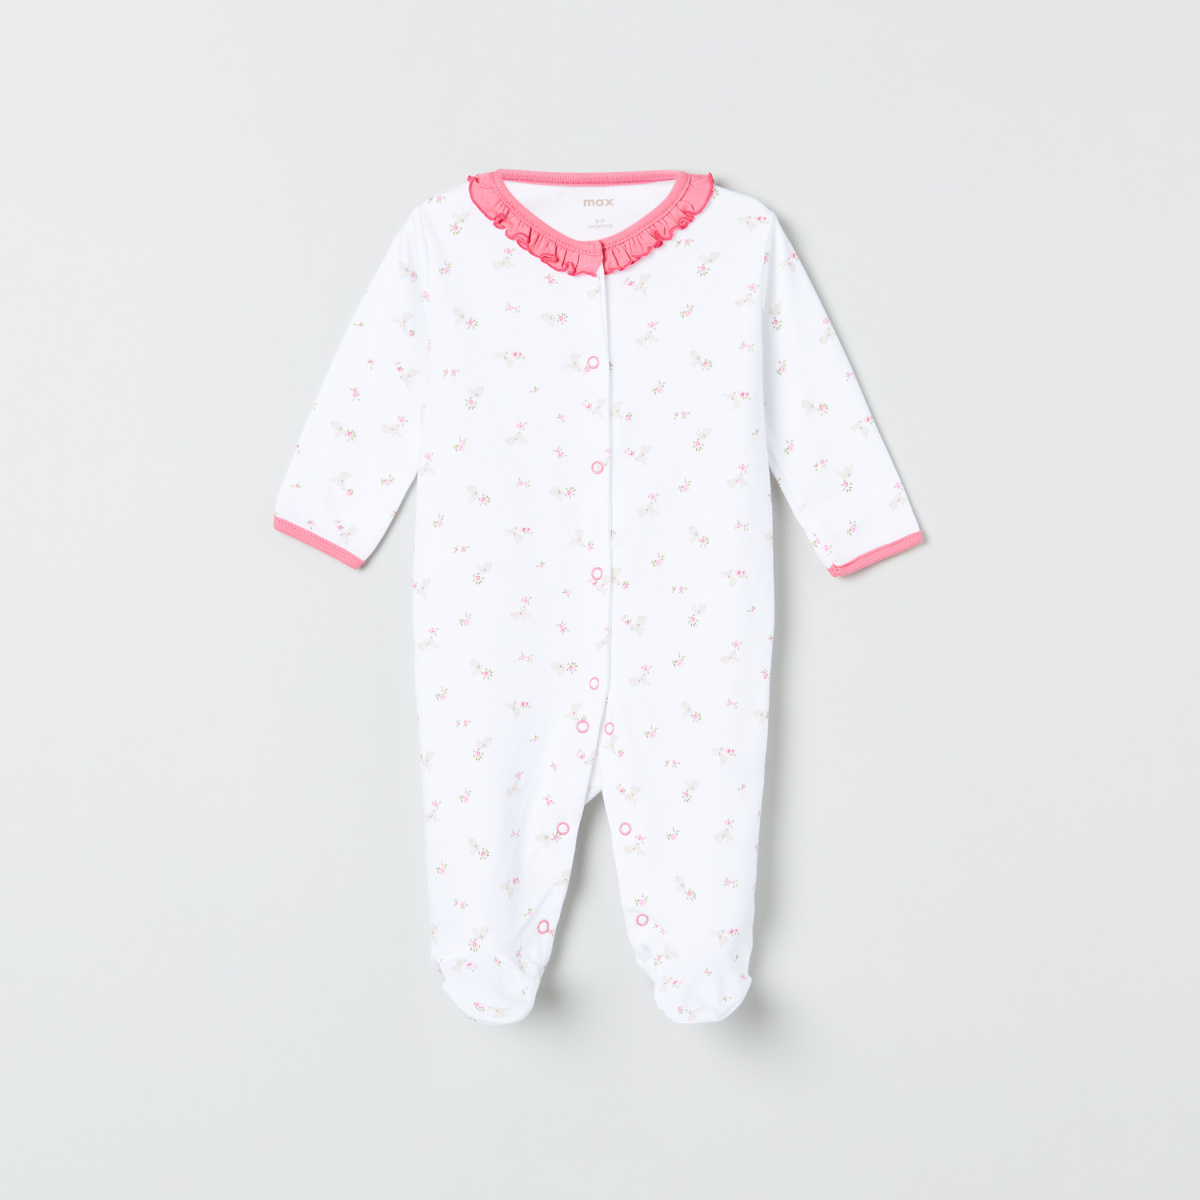 MAX Printed Knitted Sleepsuit